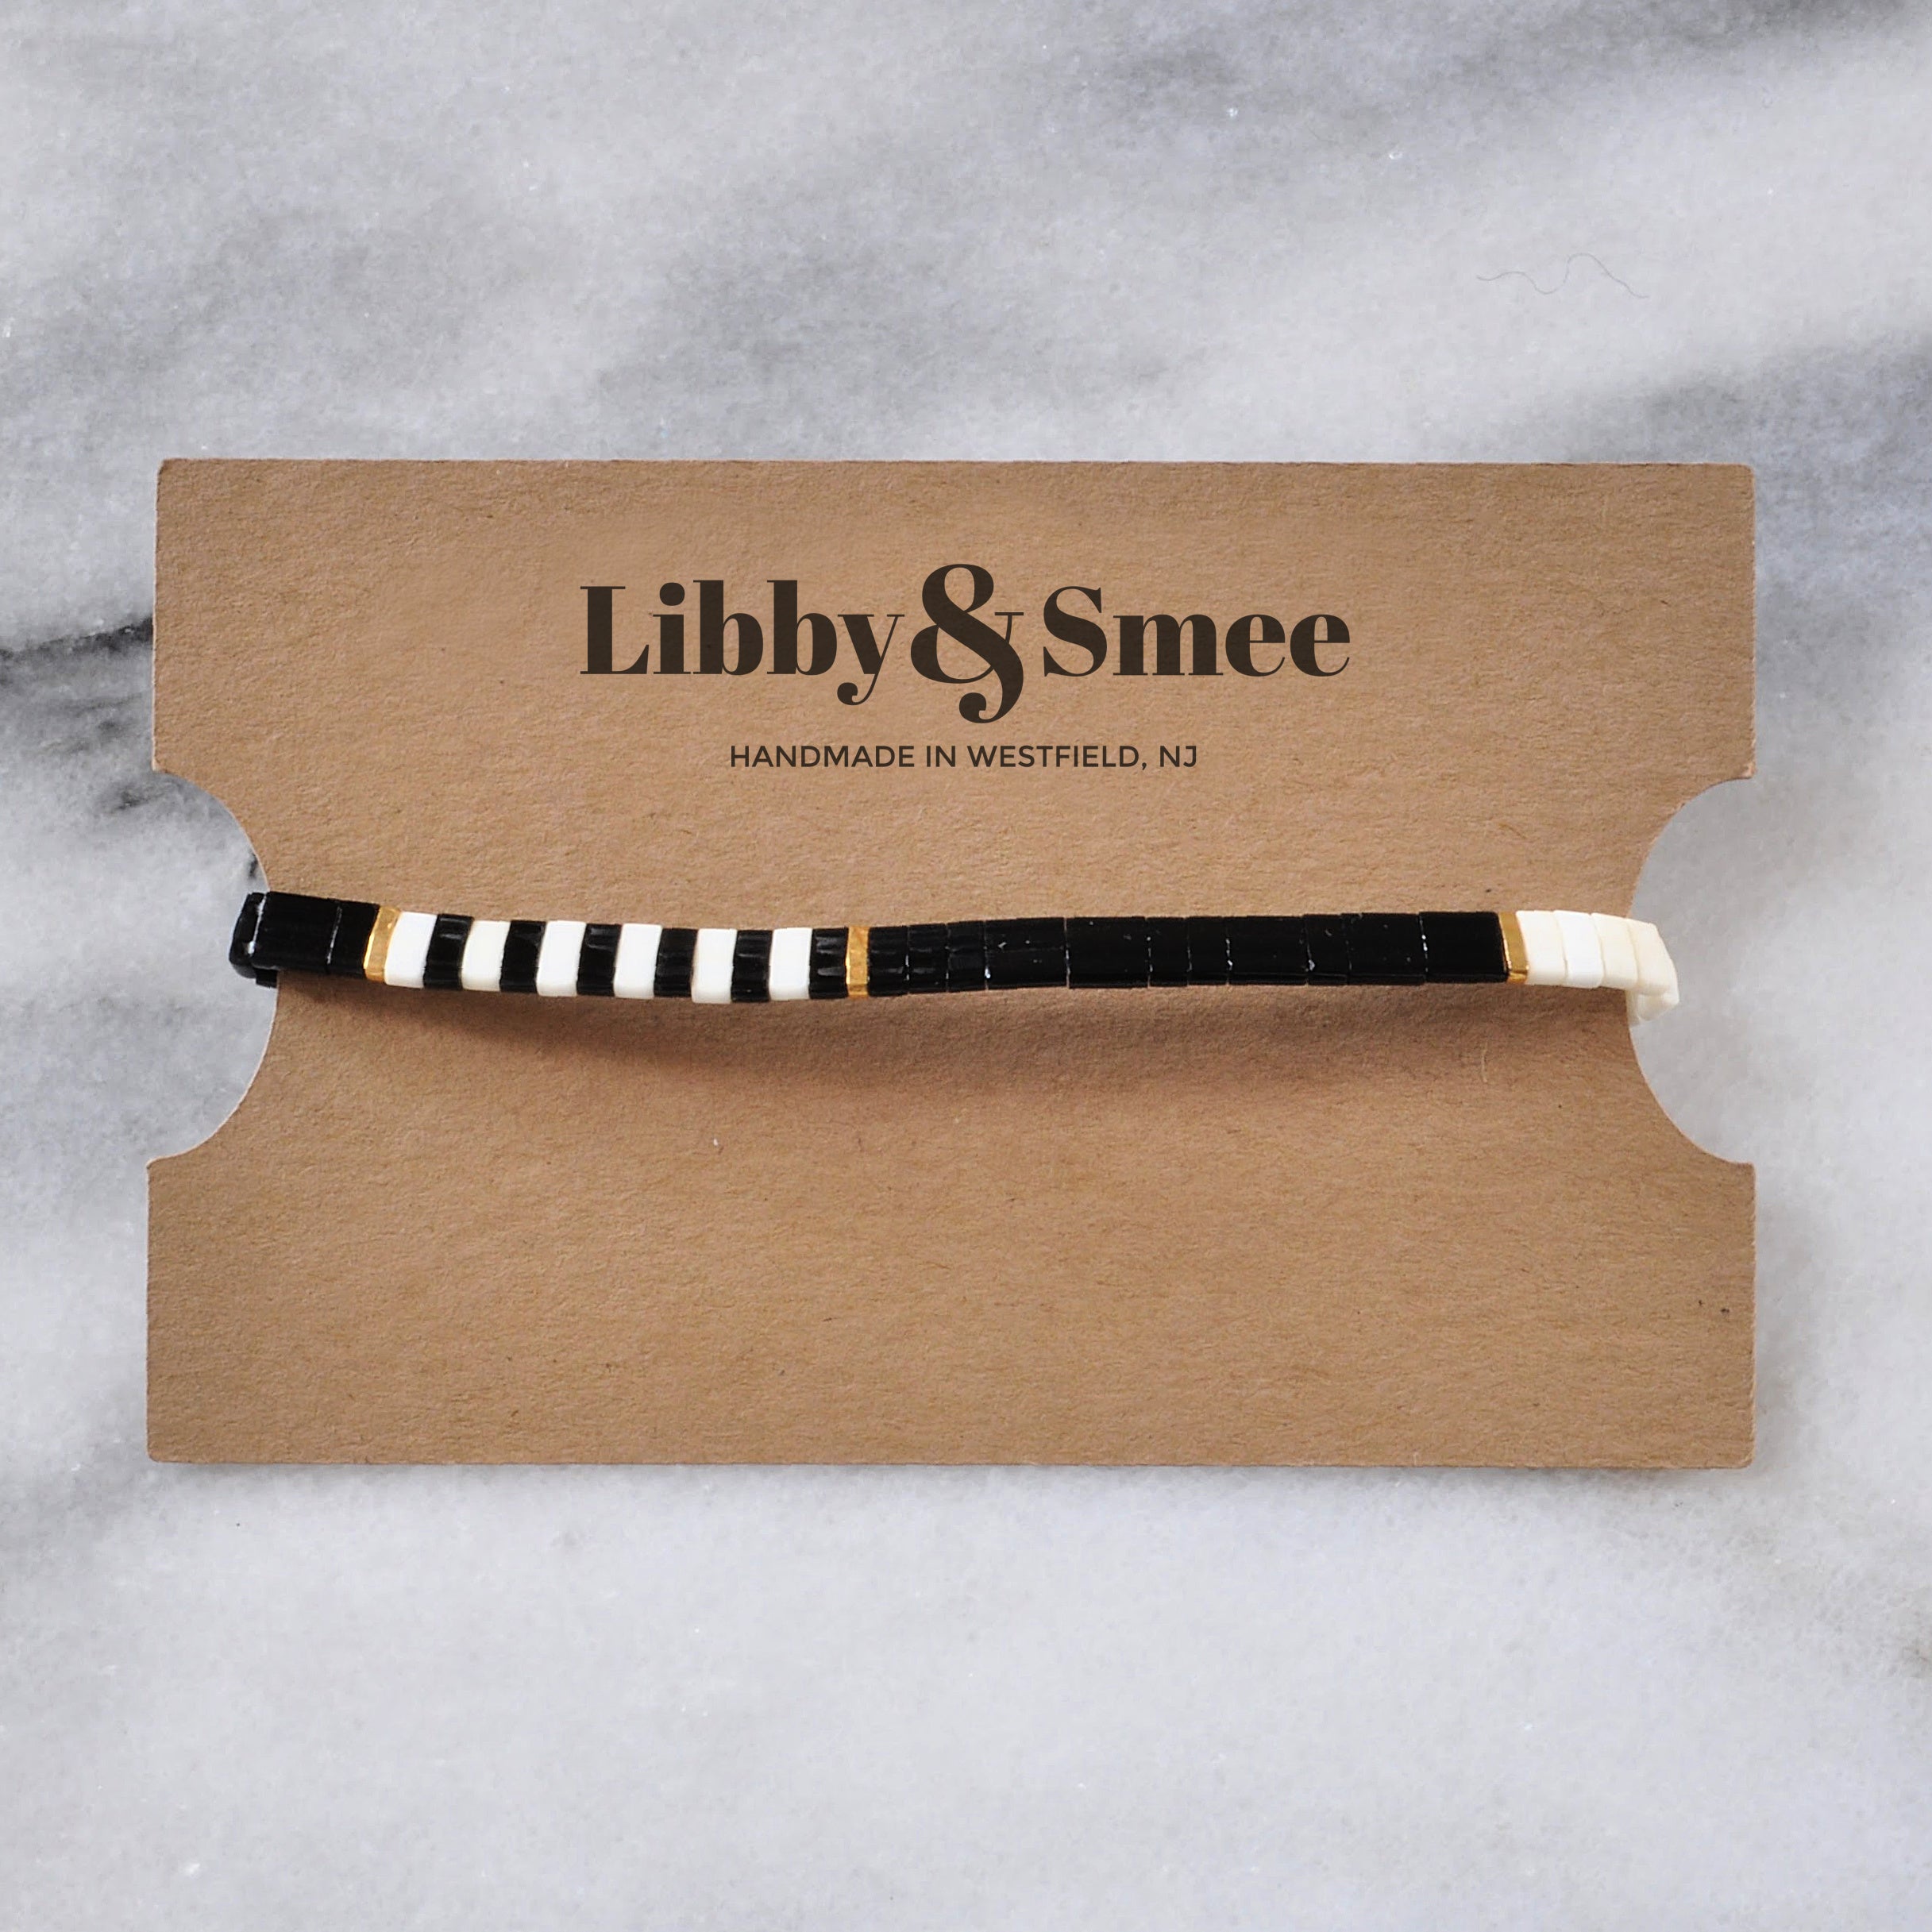 Libby & Smee stretch tile bracelet in Piano